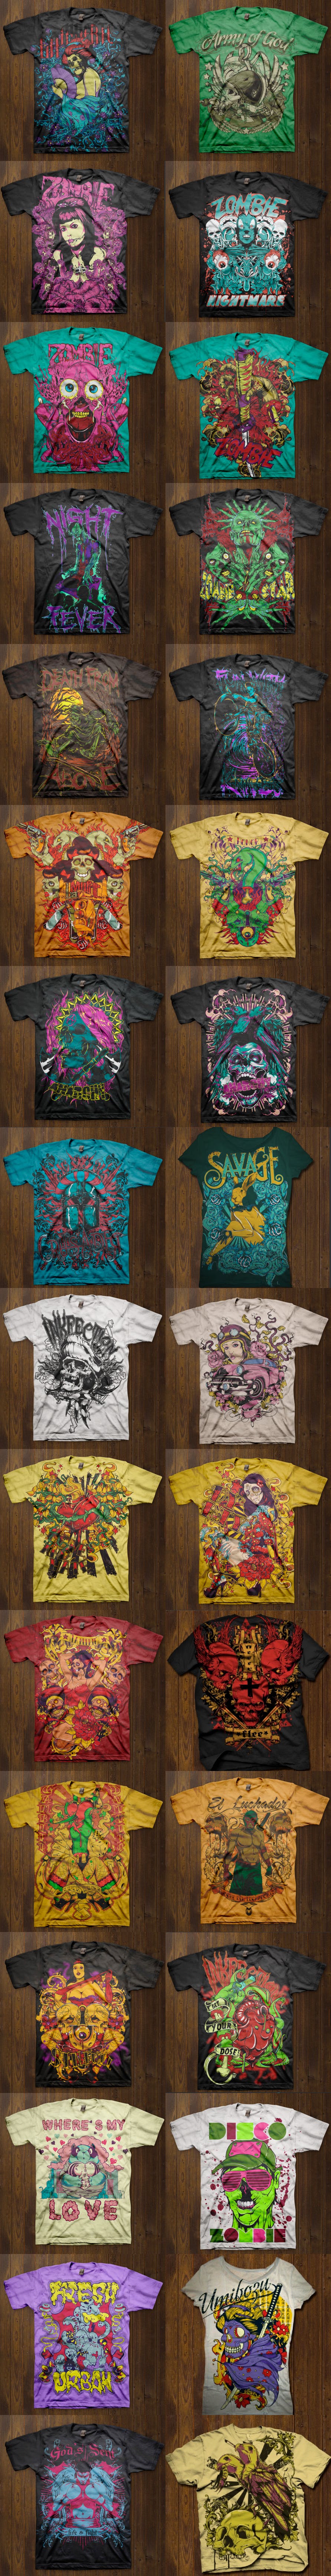 Amazing offer - every t-shirt design for 5$!!!